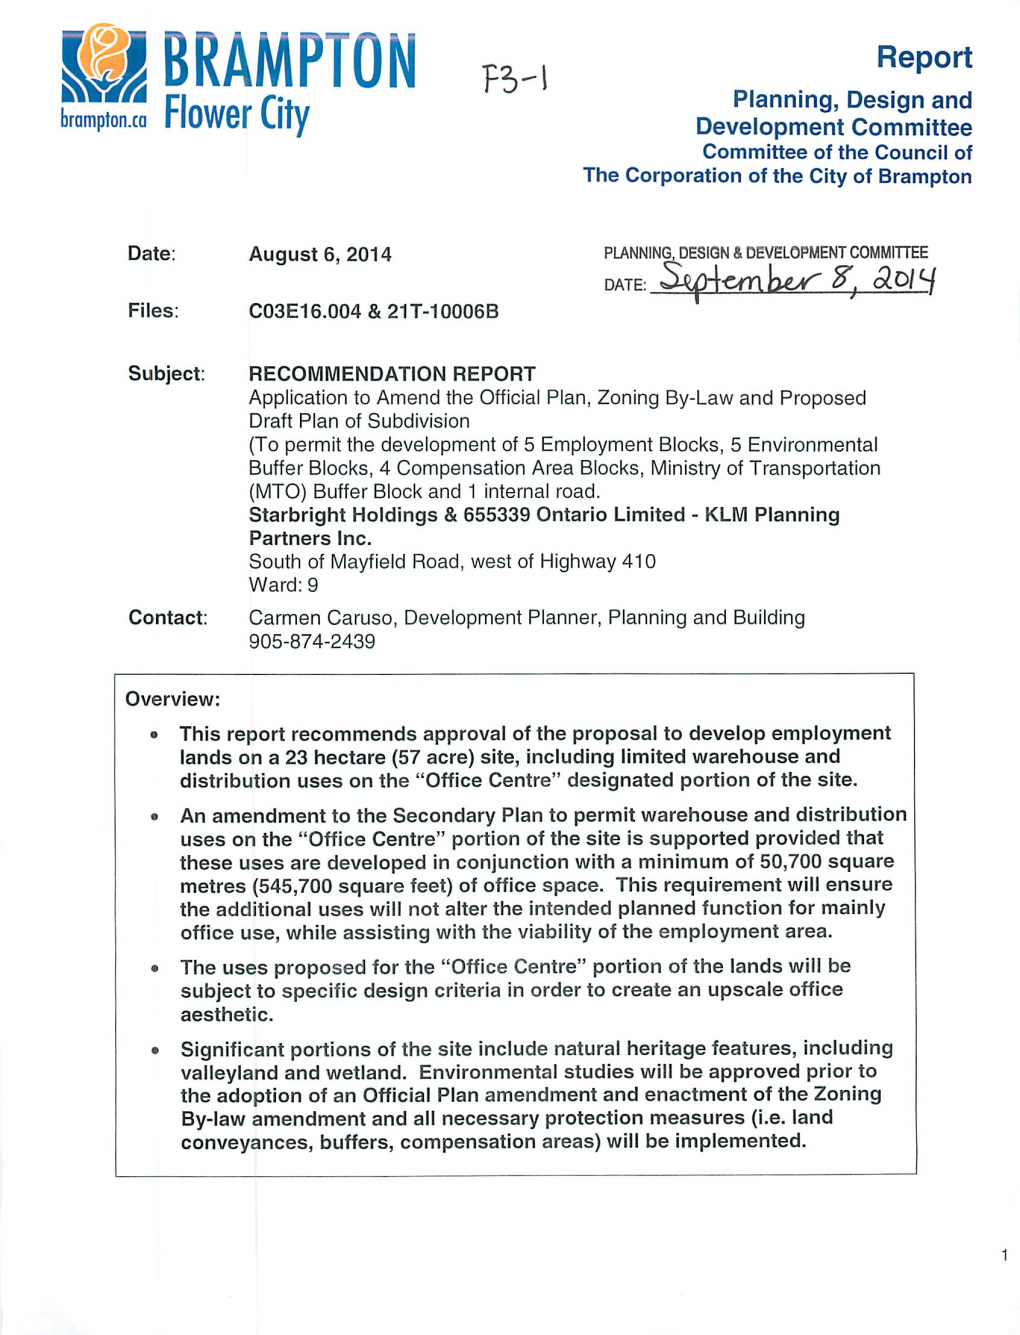 Planning, Design and Development Committee Item F3 for September 8